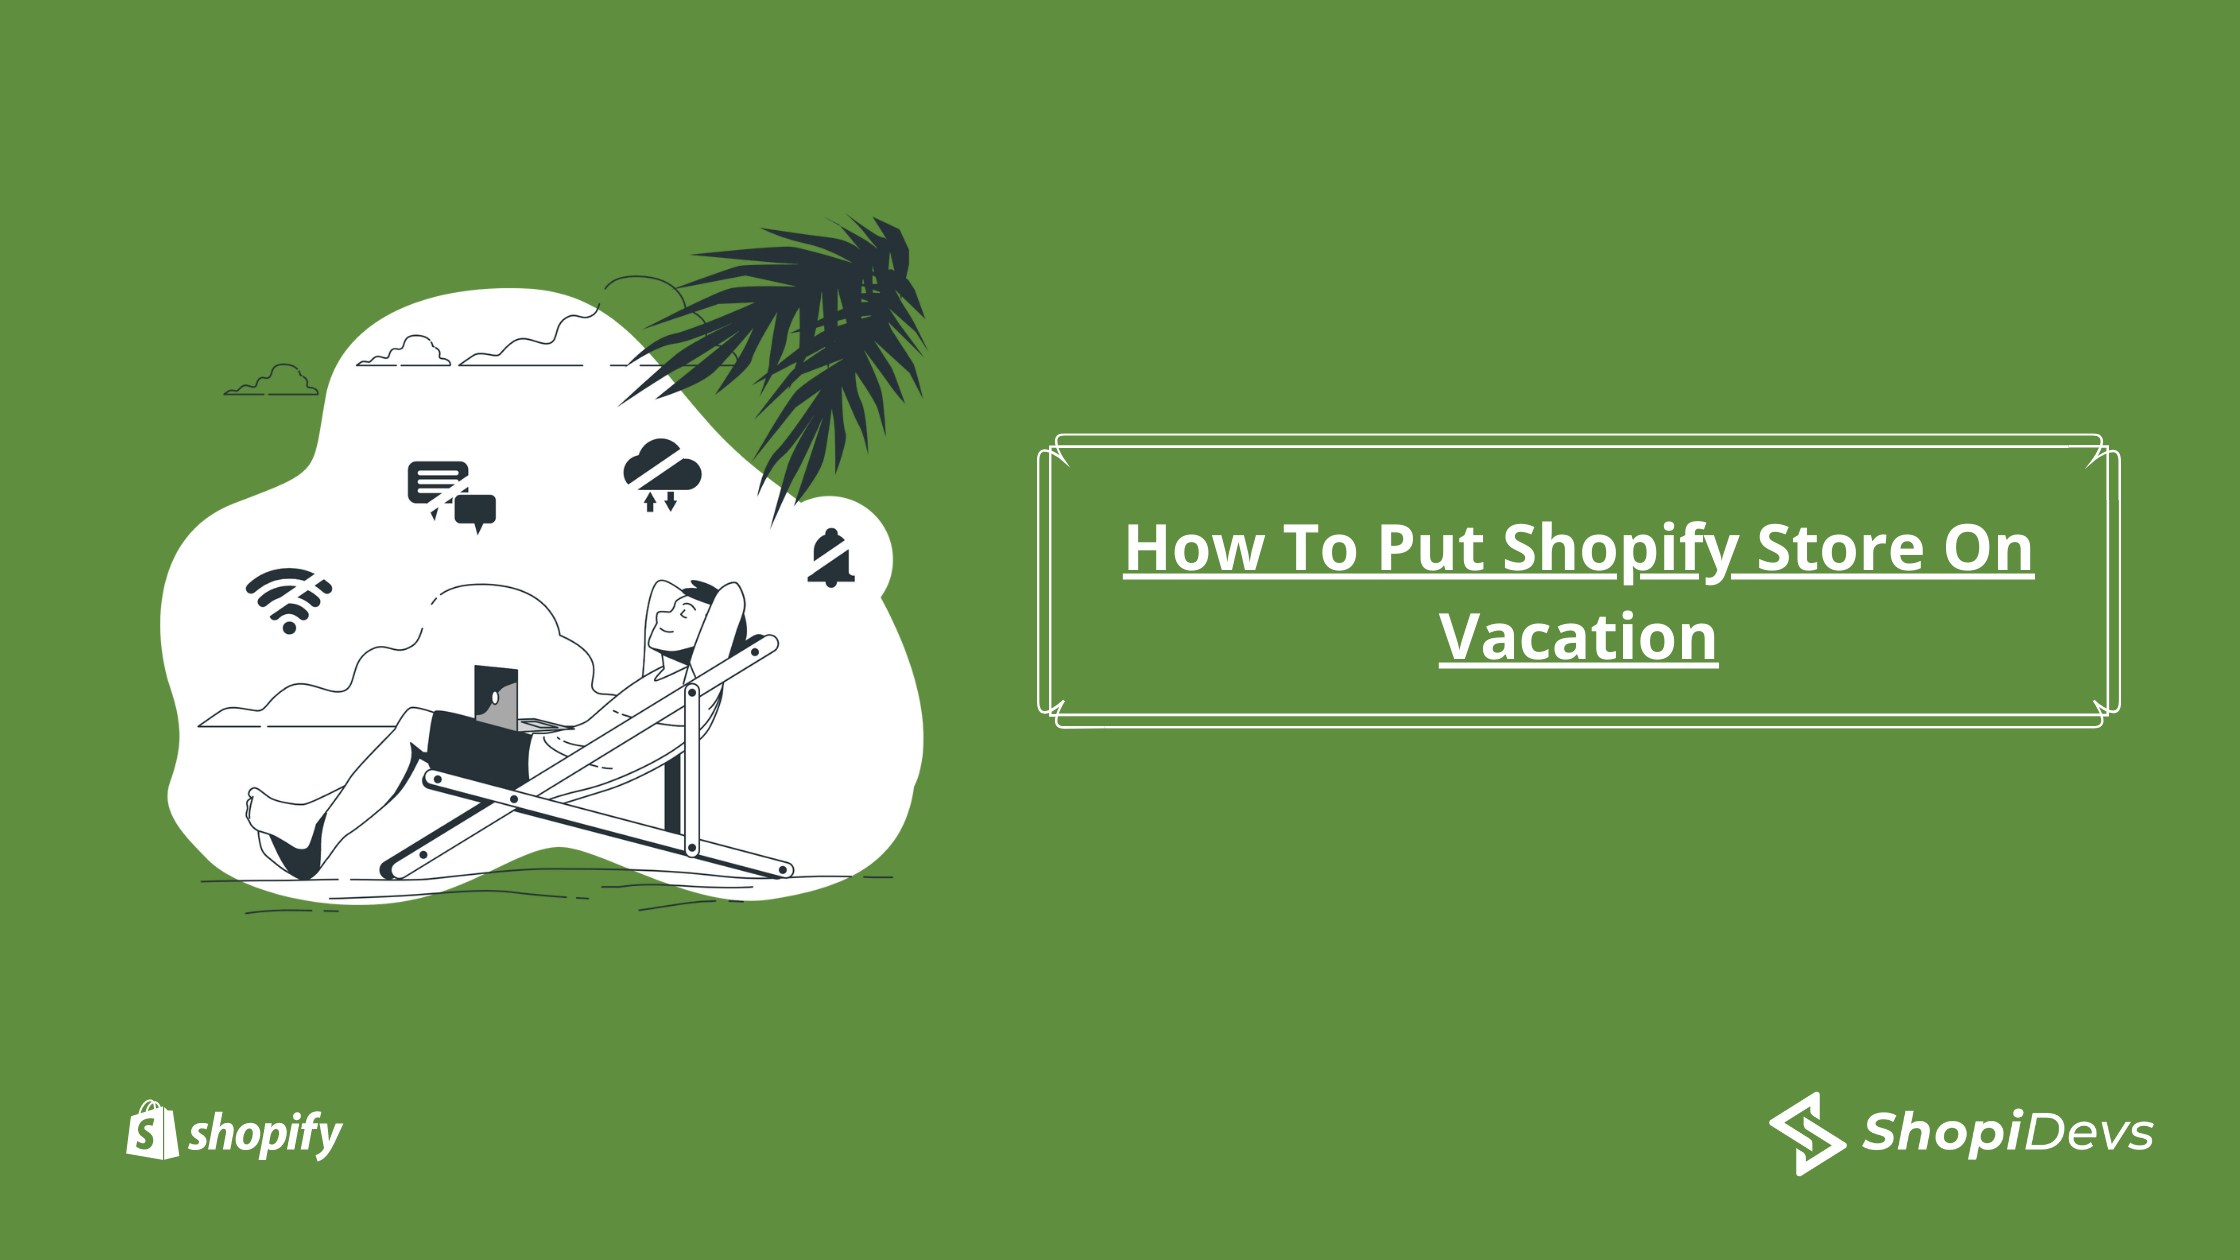 How To Put Shopify Store On Vacation